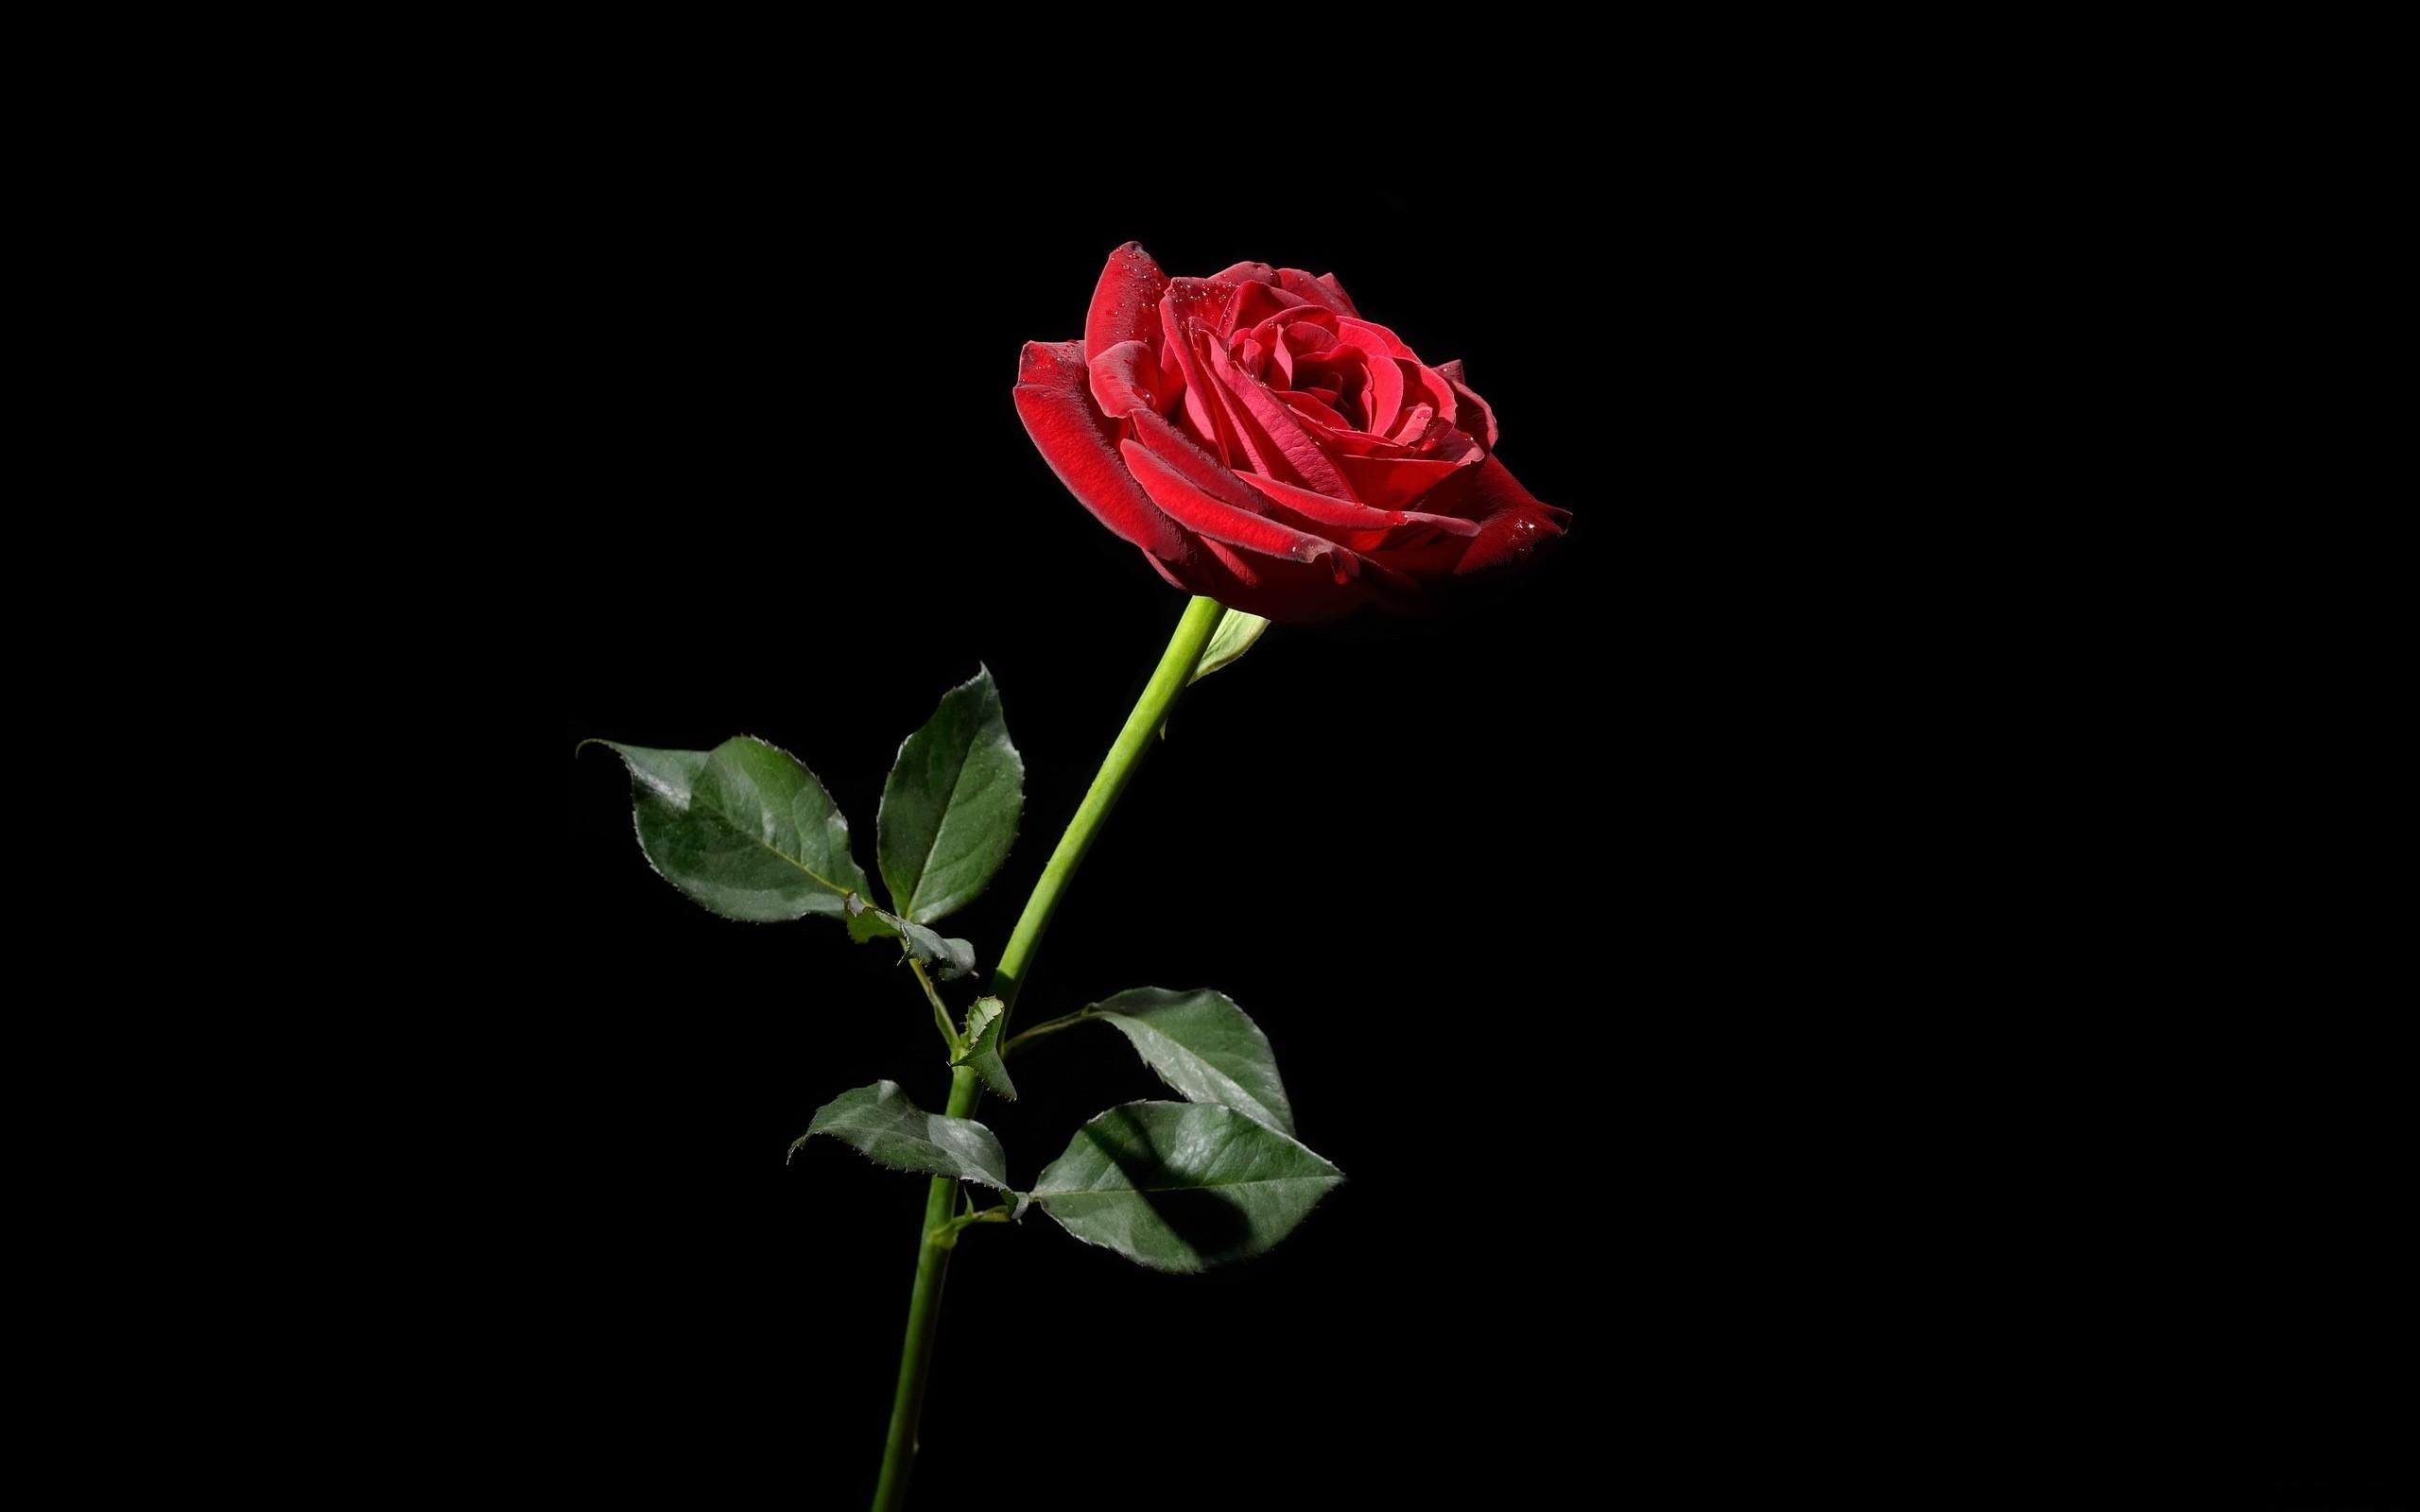 Free download 30 wallpaper perfect for AMOLED screens AndroidGuys [2560x1600] for your Desktop, Mobile & Tablet. Explore Rose With Black Background. Black Rose Wallpaper, Black and Red Rose Wallpaper